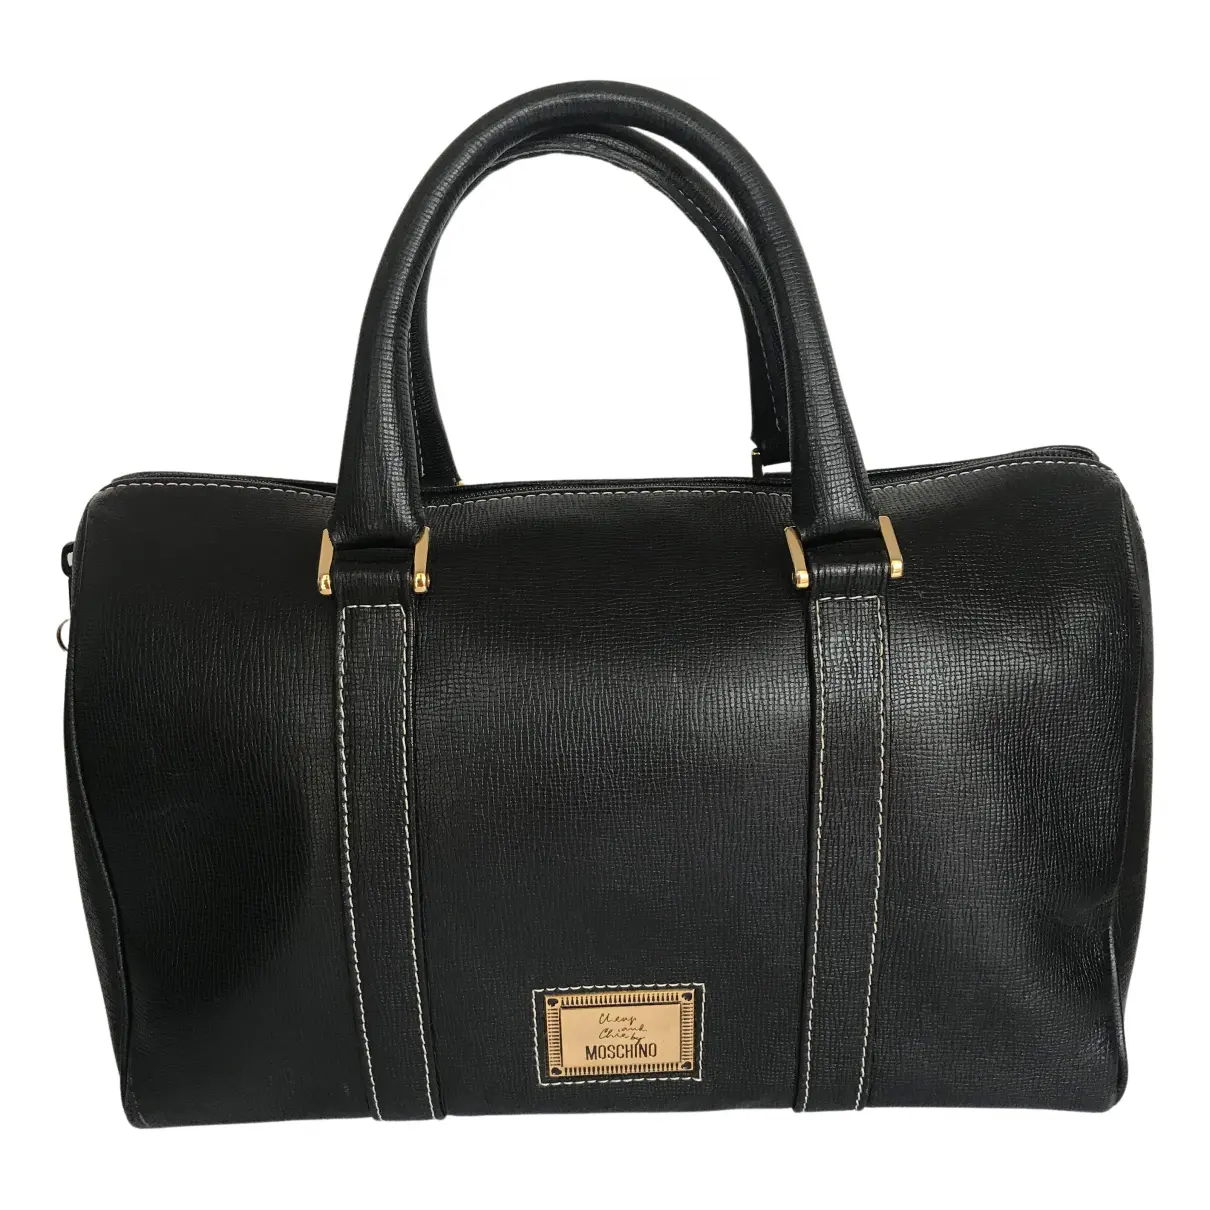 Leather bag Moschino Cheap And Chic